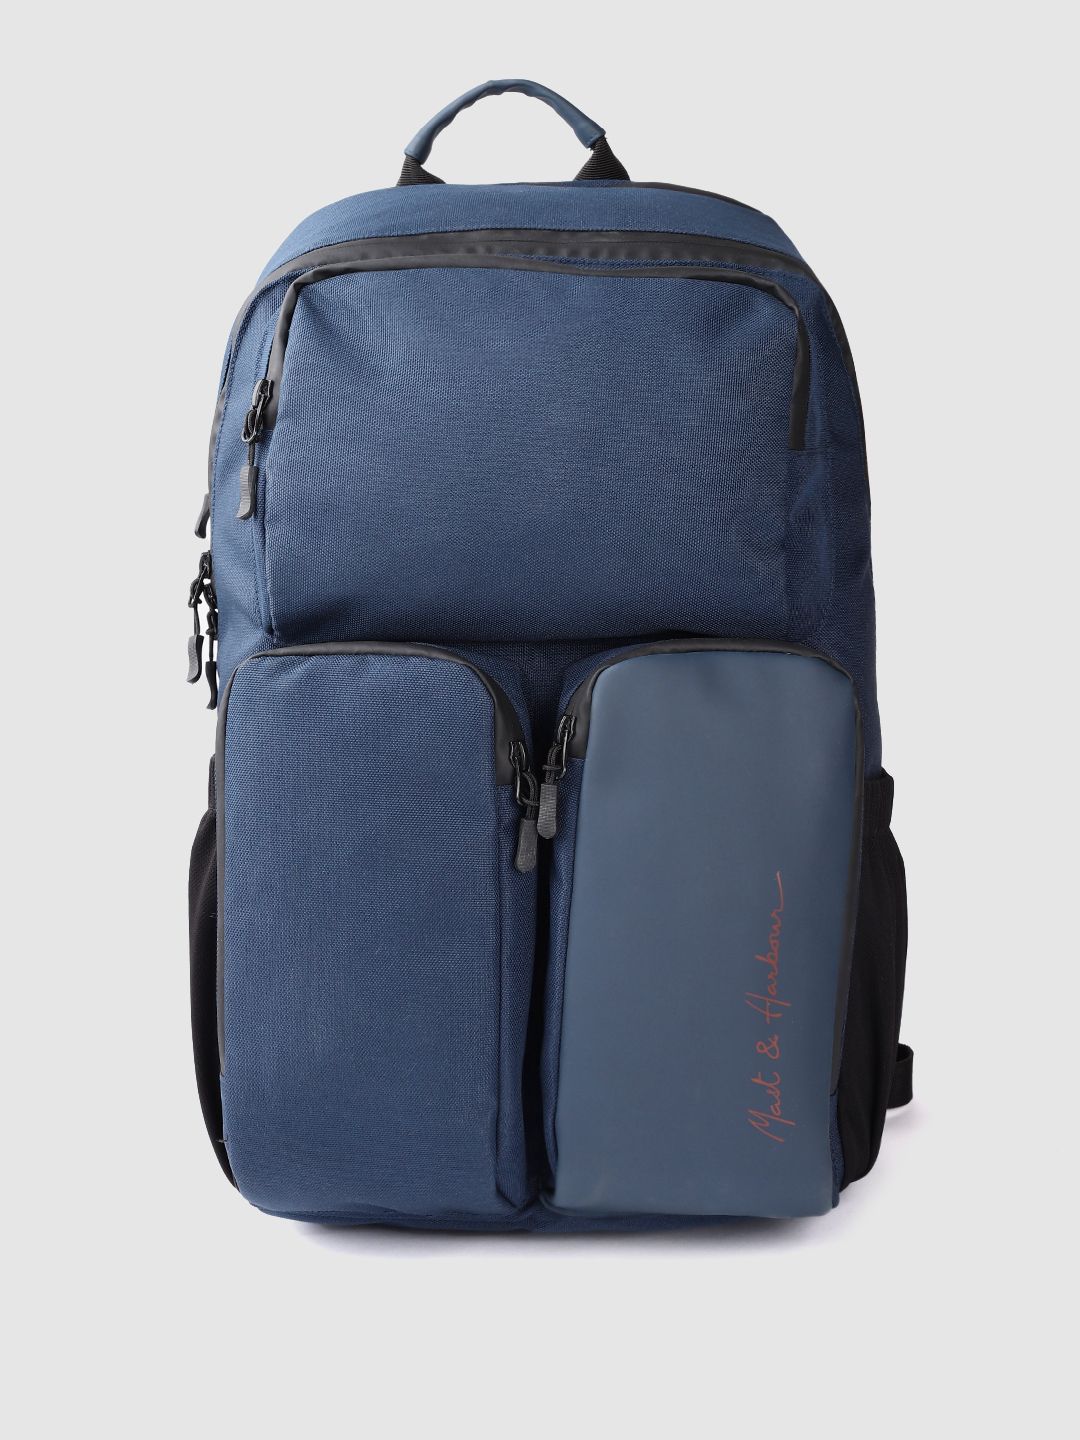 Mast & Harbour Unisex Navy Blue Solid Backpack 27.3 L Price in India